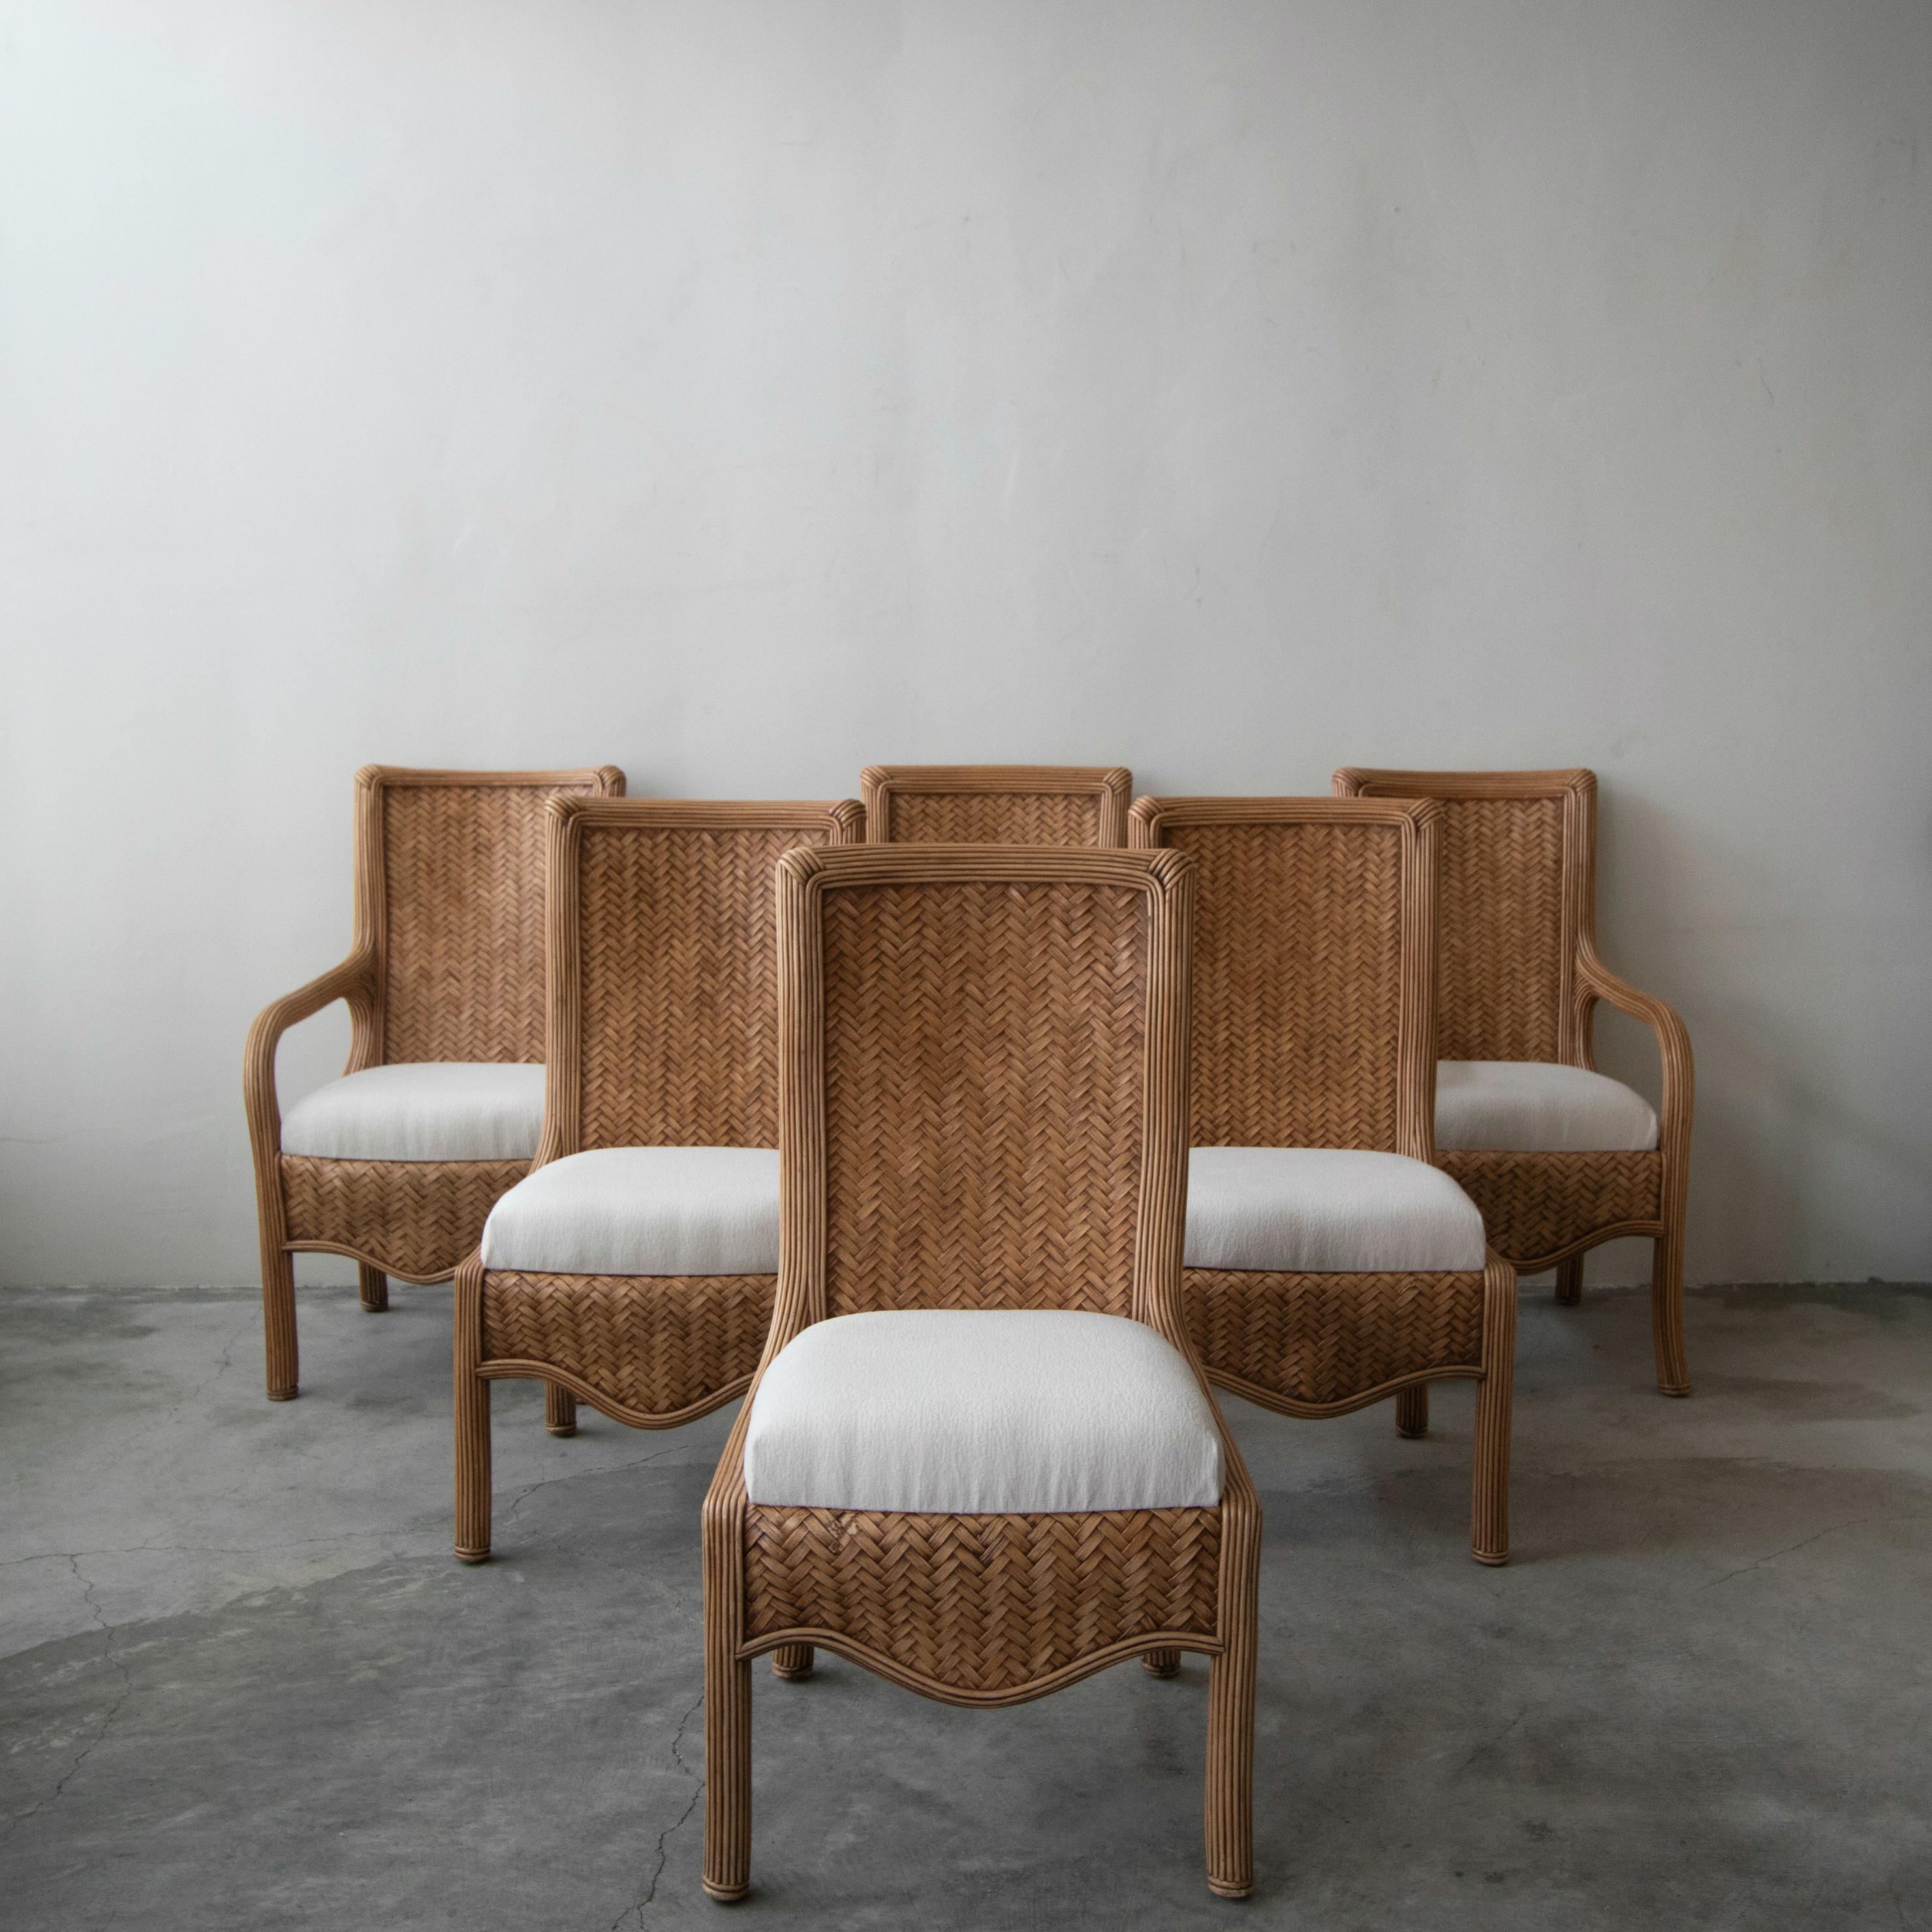 1980s vintage, reeded bamboo dining chairs. Part of the Linea Cara Collection by Karl Rausch for Baker. Chairs feature beautiful natural reeded bamboo and basketwoven rattan backs, the seats are upholstered in a softly textured off white